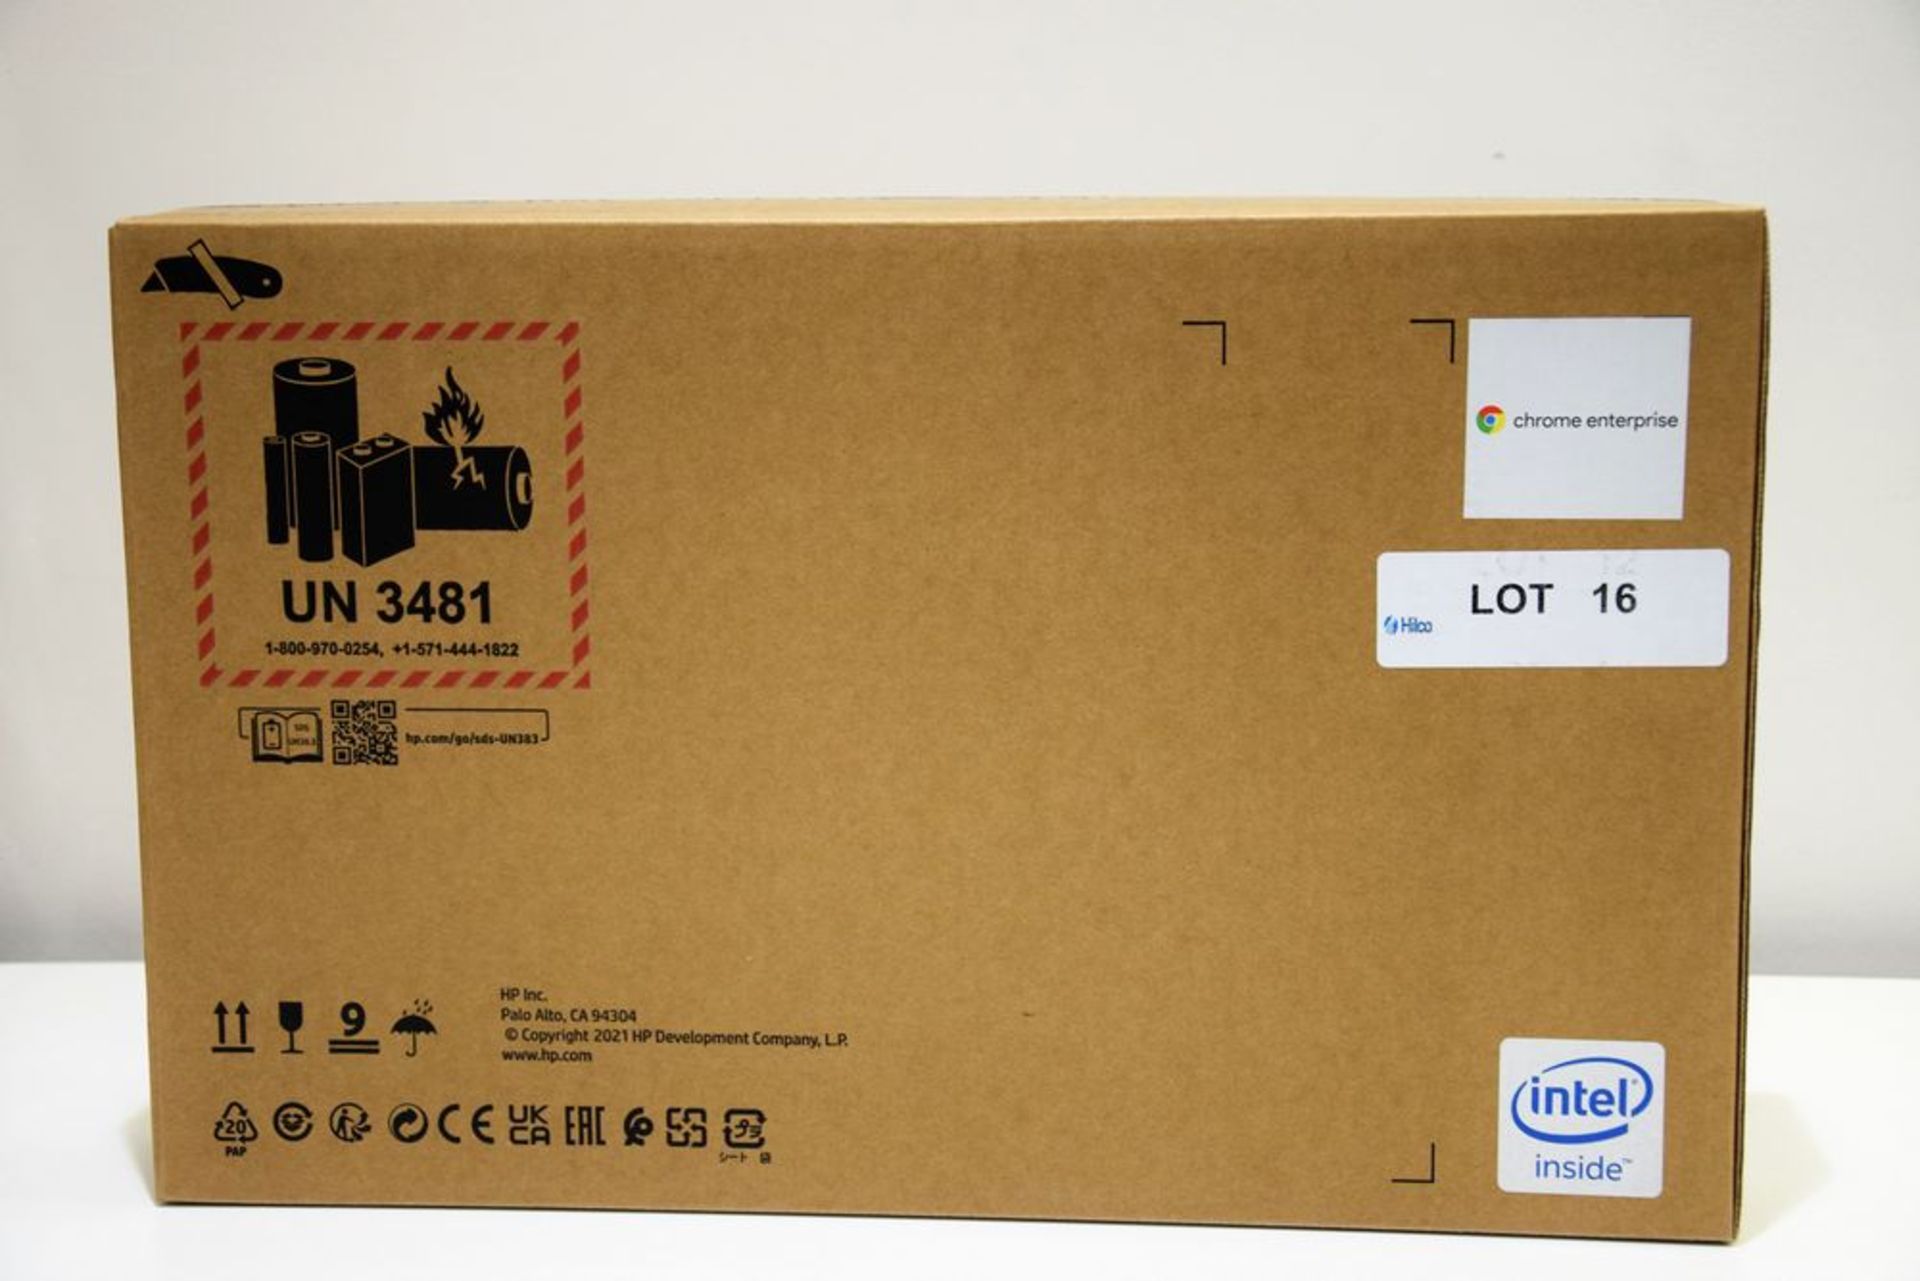 HP Pro C640 Chromebook Enterprise Laptop Computer (New and Boxed) - Image 2 of 4